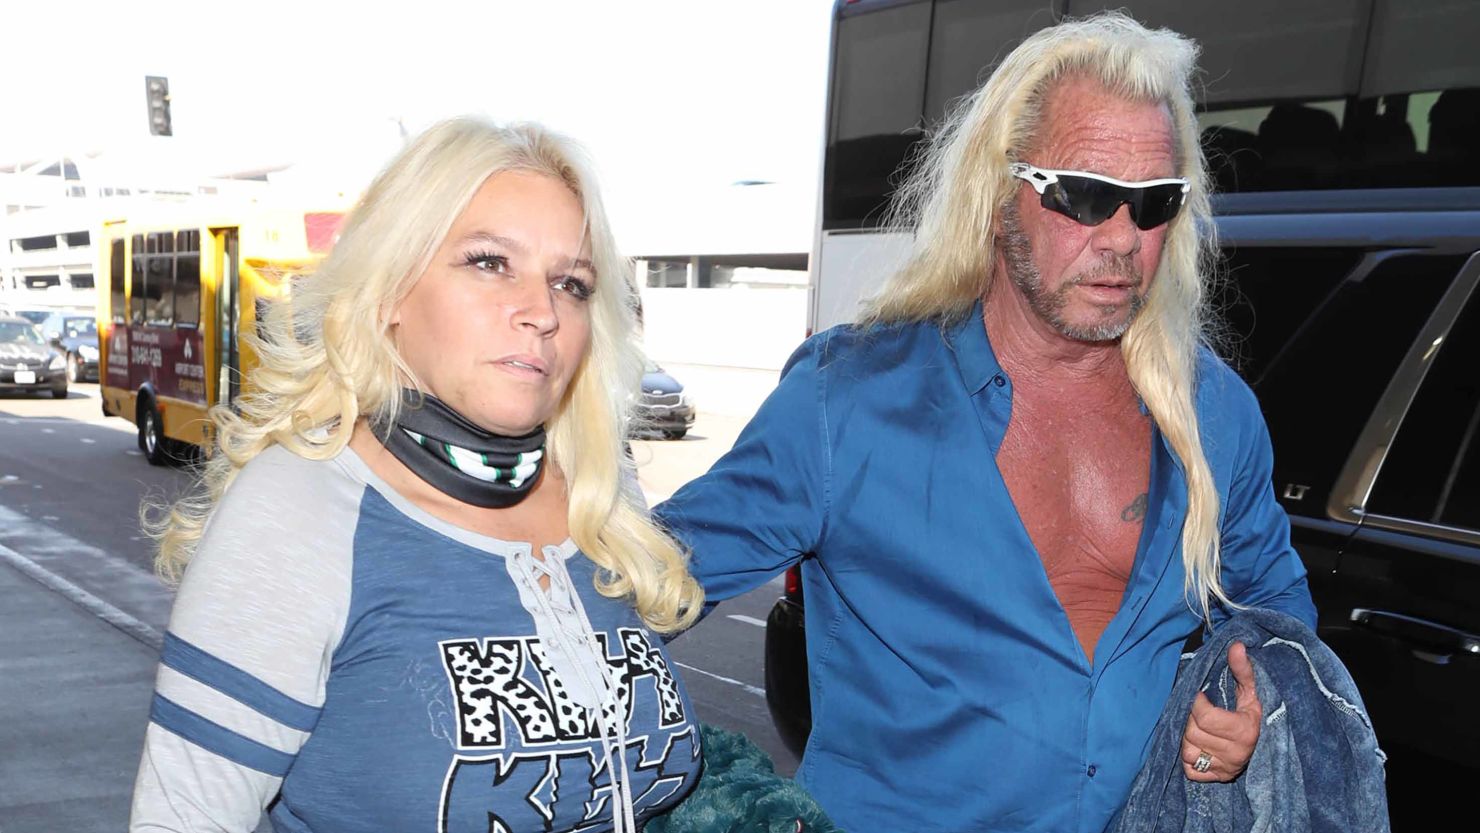 Dog the Bounty Hunter and Beth Chapman at the Los Angeles International Airport on September 28, 2017.  